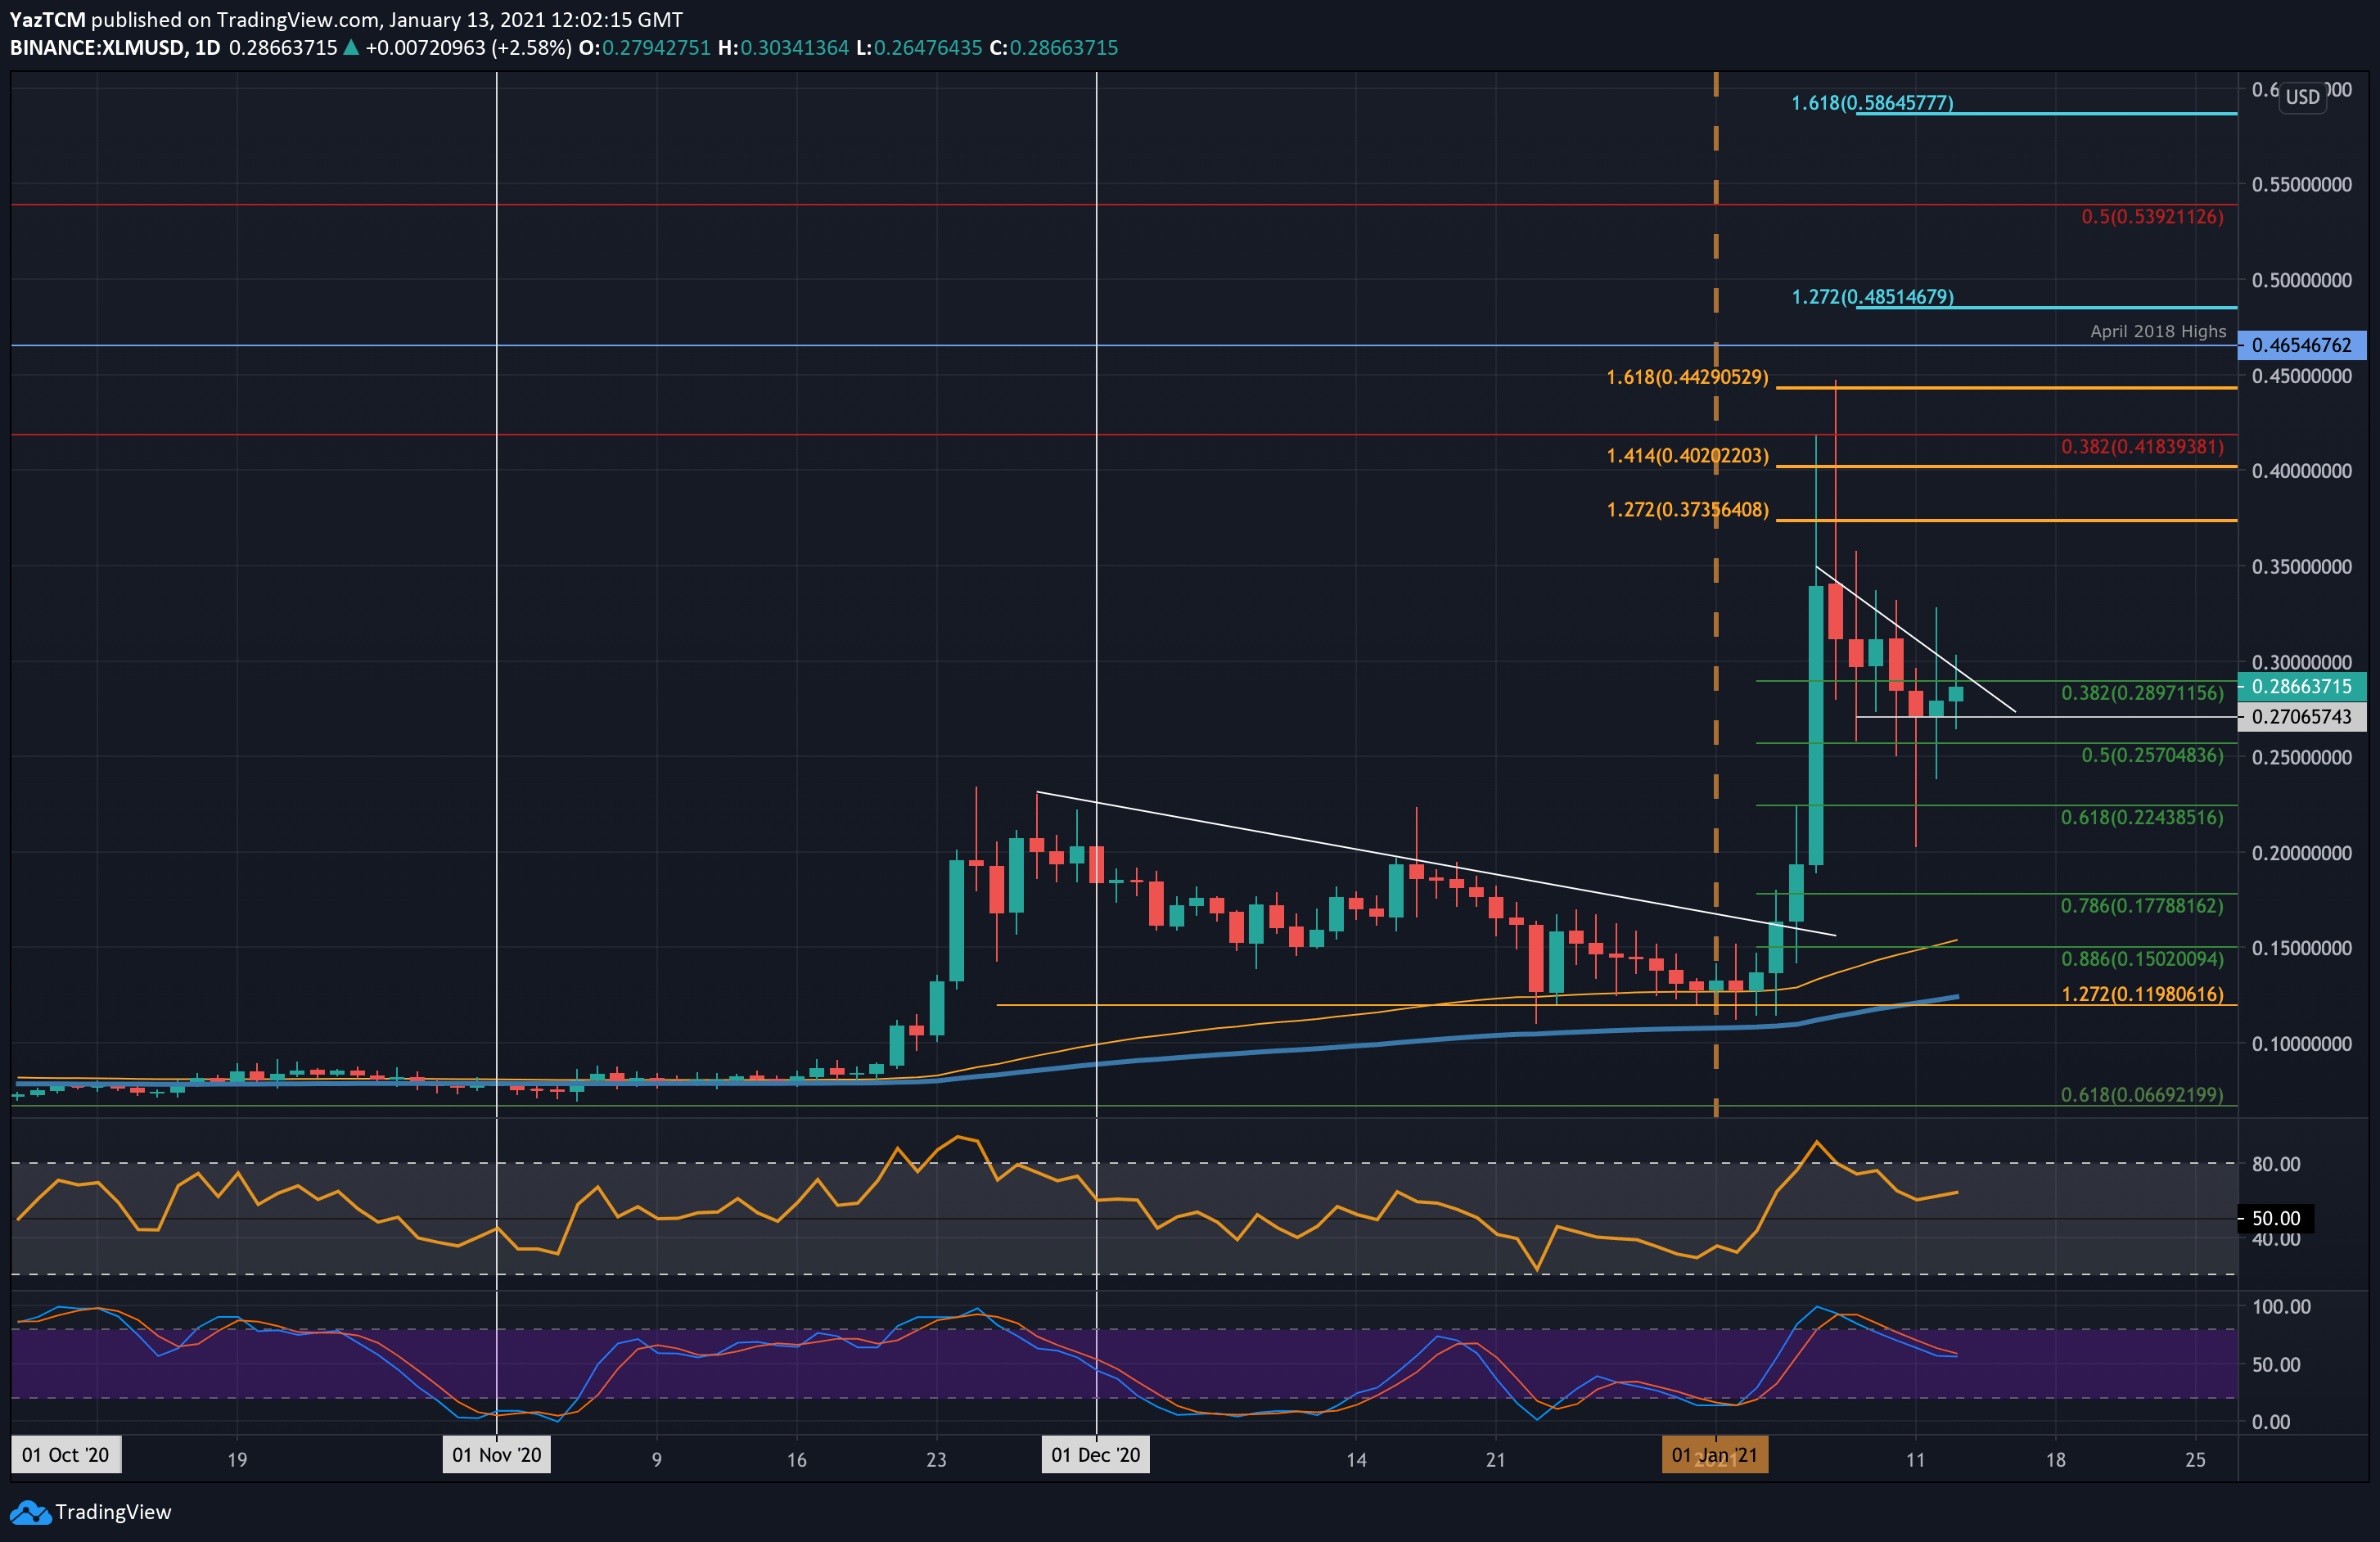 Stellar Price Analysis: After 50% Weekly ROI, XLM Facing Important Resistance at $0.3